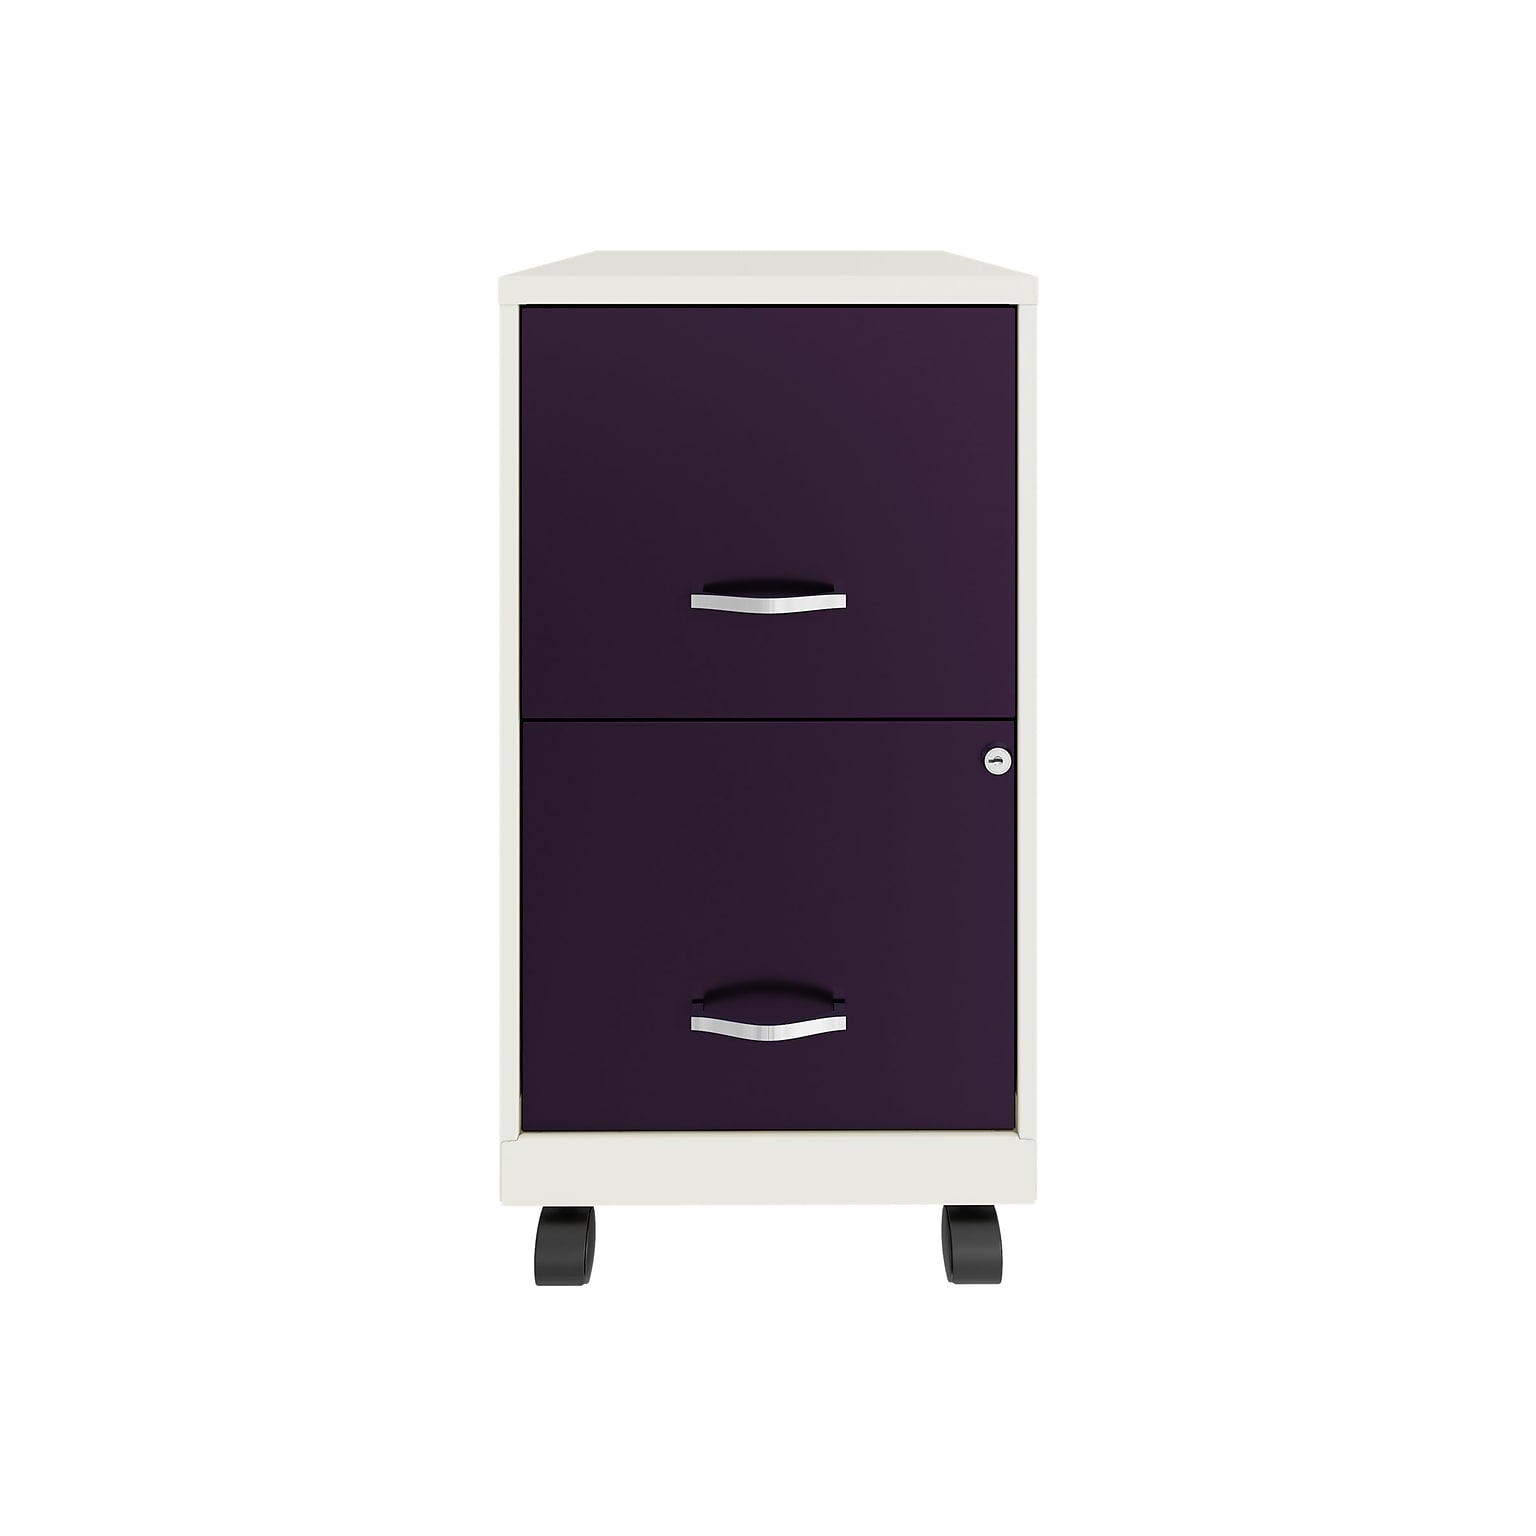 Space Solutions SOHO Smart File 2-Drawer Mobile Vertical File Cabinet, Letter Size, Lockable, Pearl White/Midnight Purple(25336)